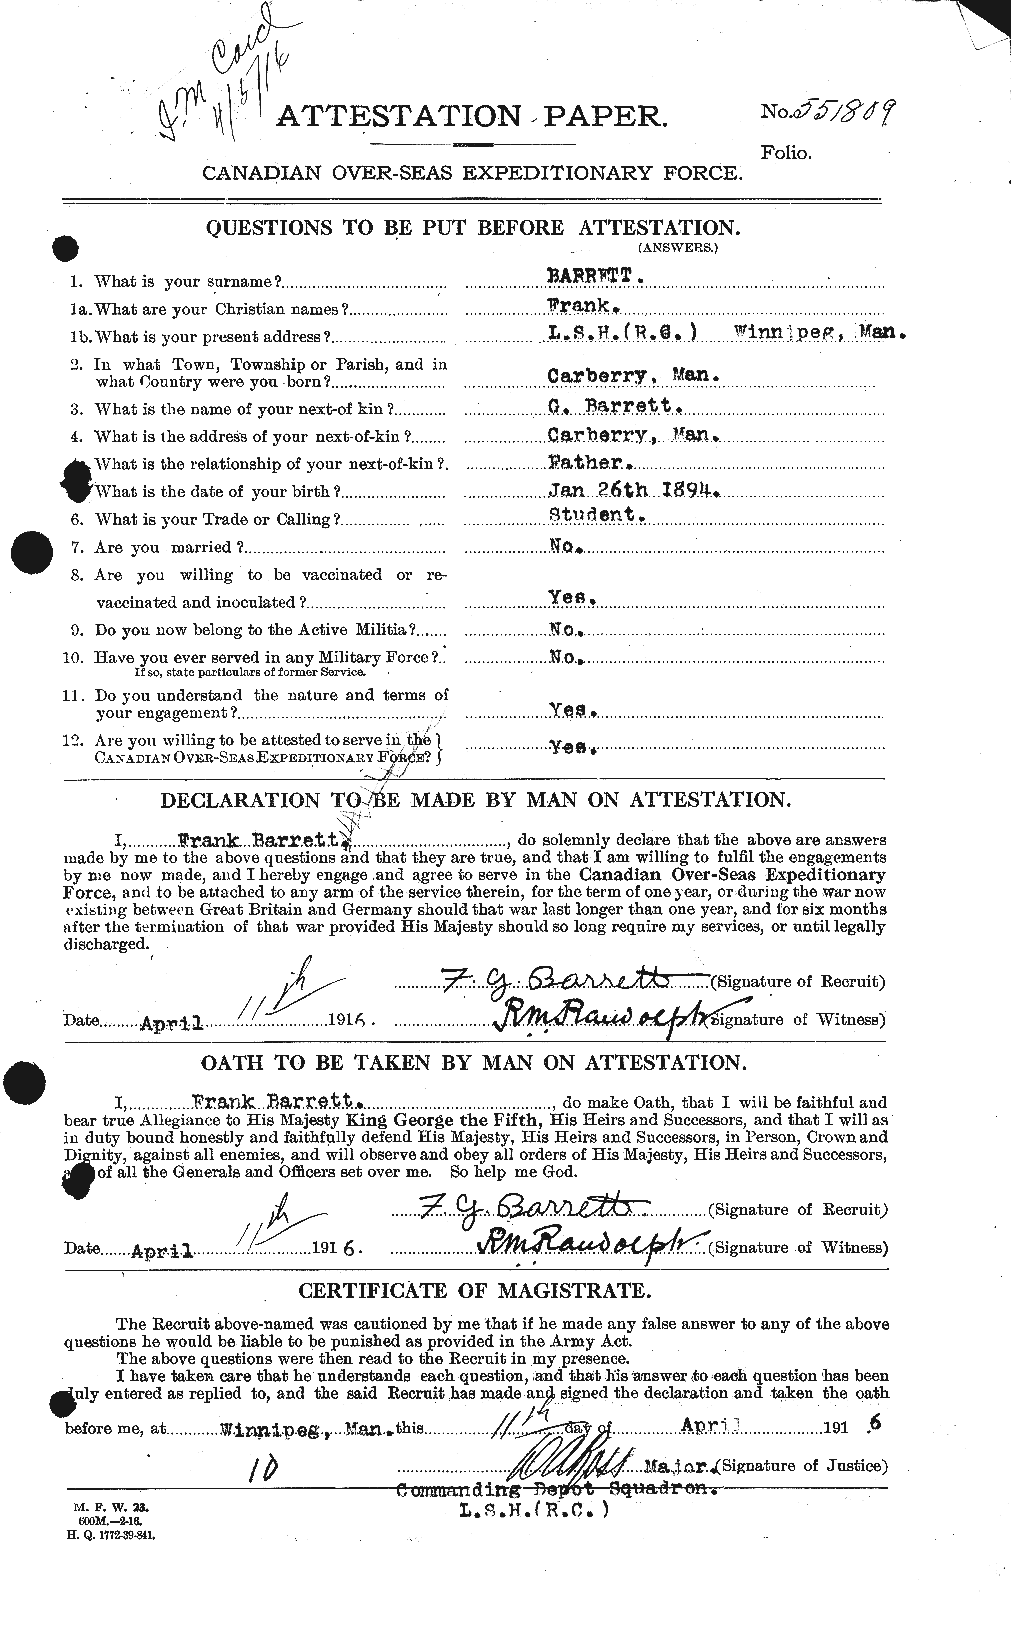 Personnel Records of the First World War - CEF 220342a